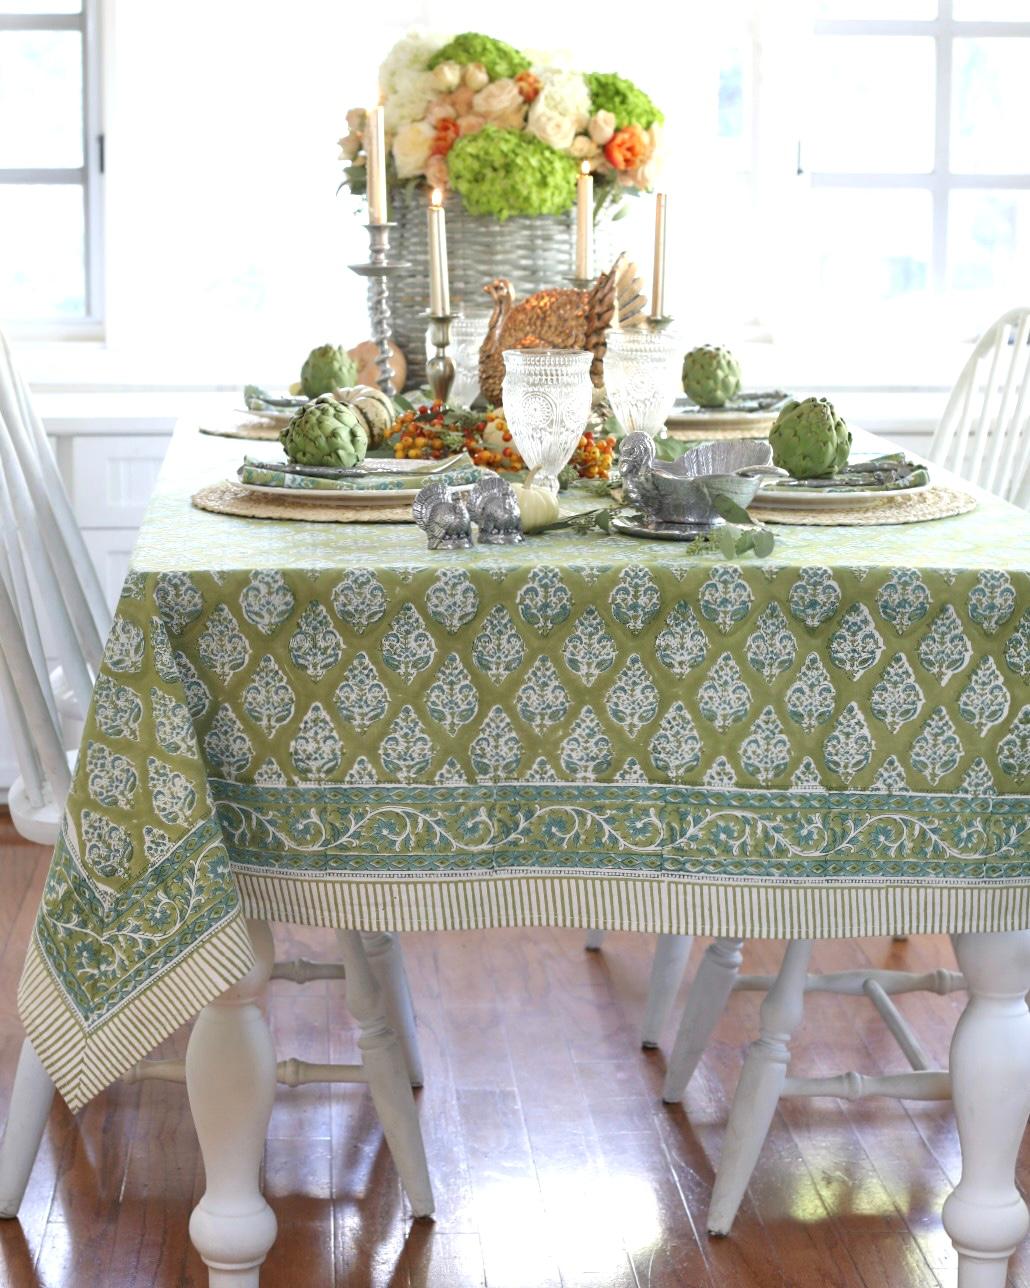 Charlotte Green Kitchen Towel – Pacific & Rose Textiles